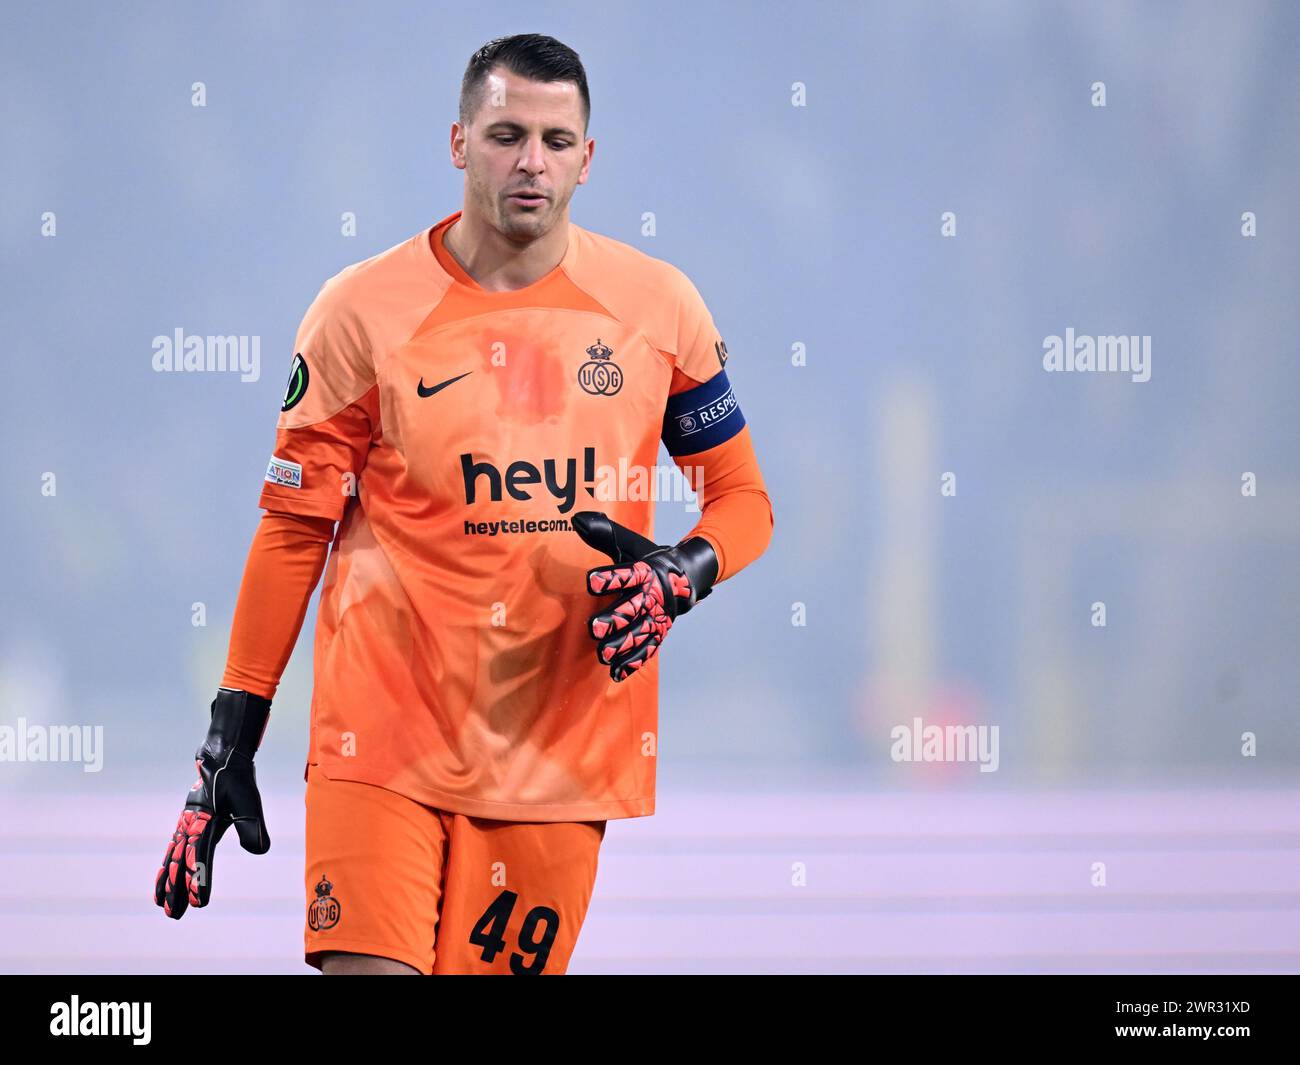 BRUSSELS - Royale Union Saint-Gilloise goalkeeper Anthony Moris during the UEFA Europa League round of 16 match between R. Union Sint Gillis and Fenerbahce SK at the Lotto Park stadium on March 7, 2024 in Brussels, Belgium. ANP | Hollandse Hoogte | GERRIT VAN COLOGNE Stock Photo